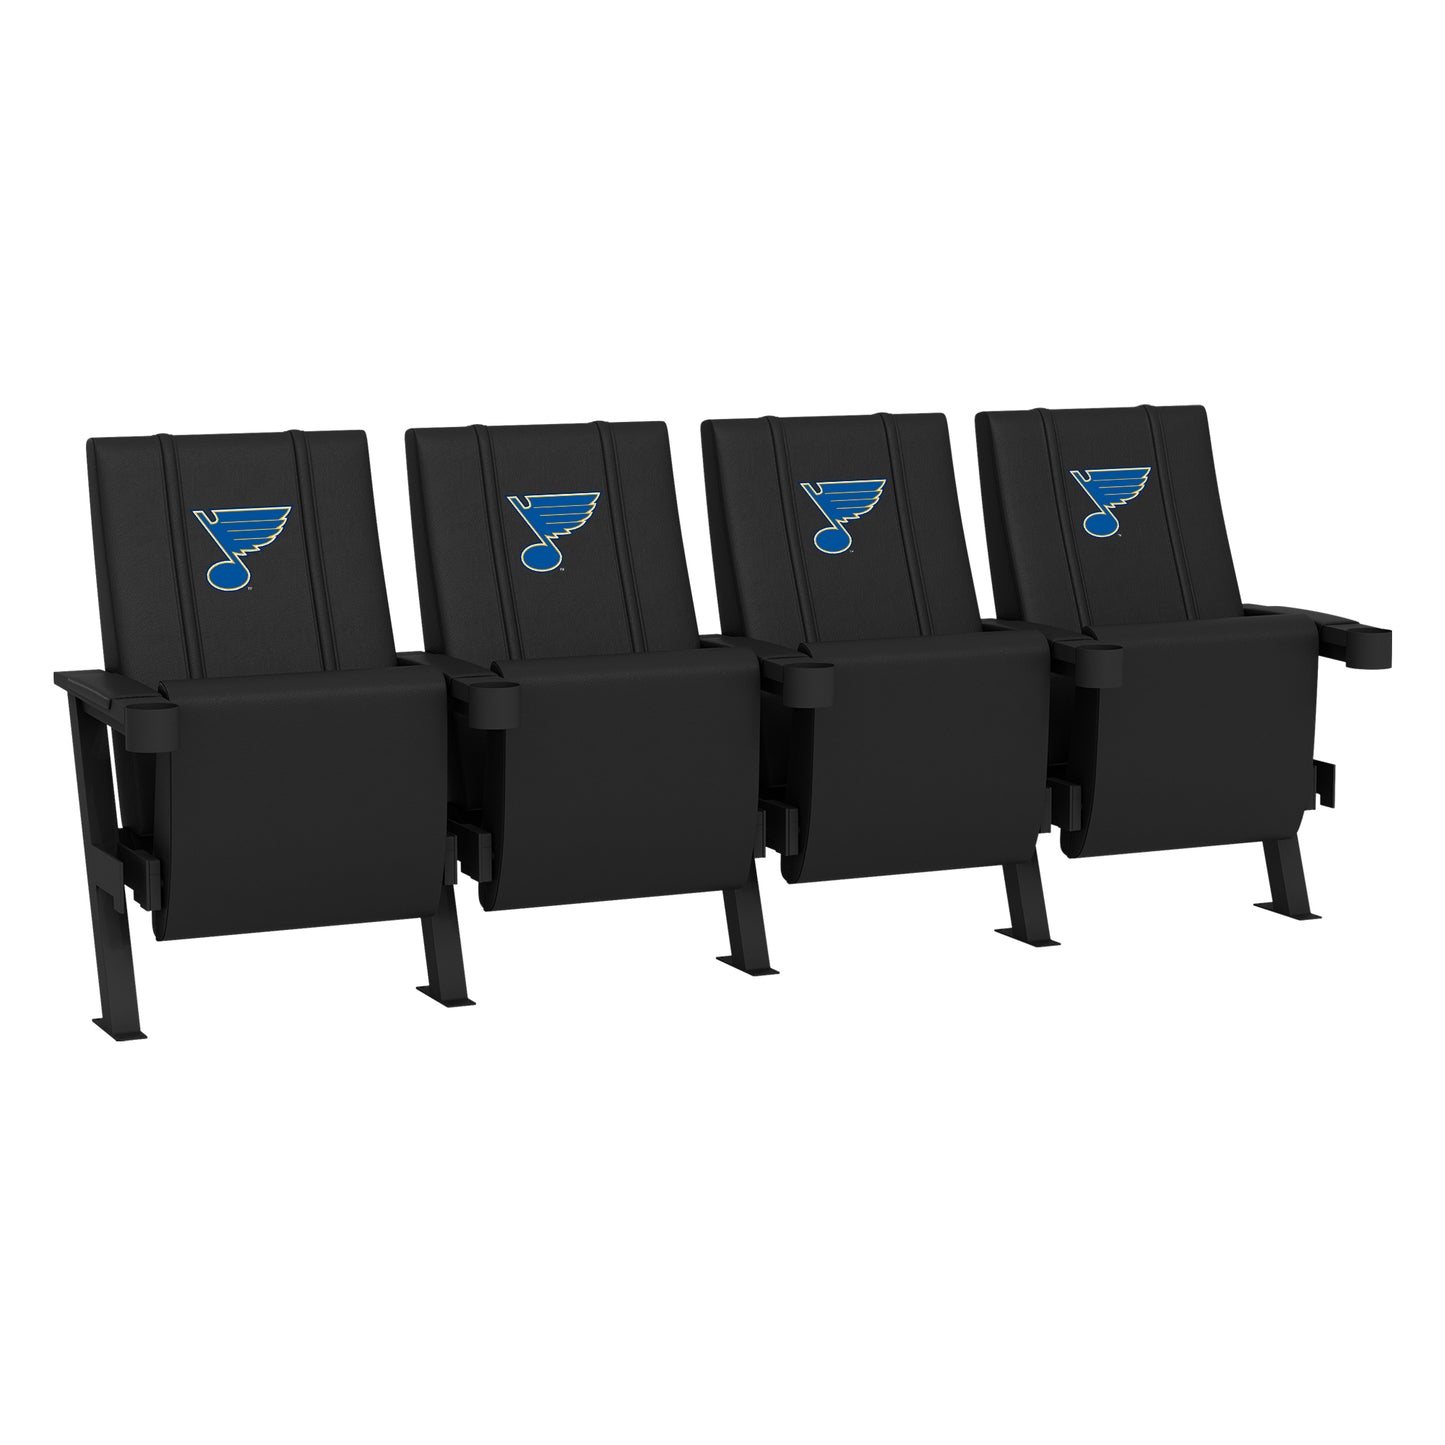 SuiteMax 3.5 VIP Seats with St. Louis Blues Logo